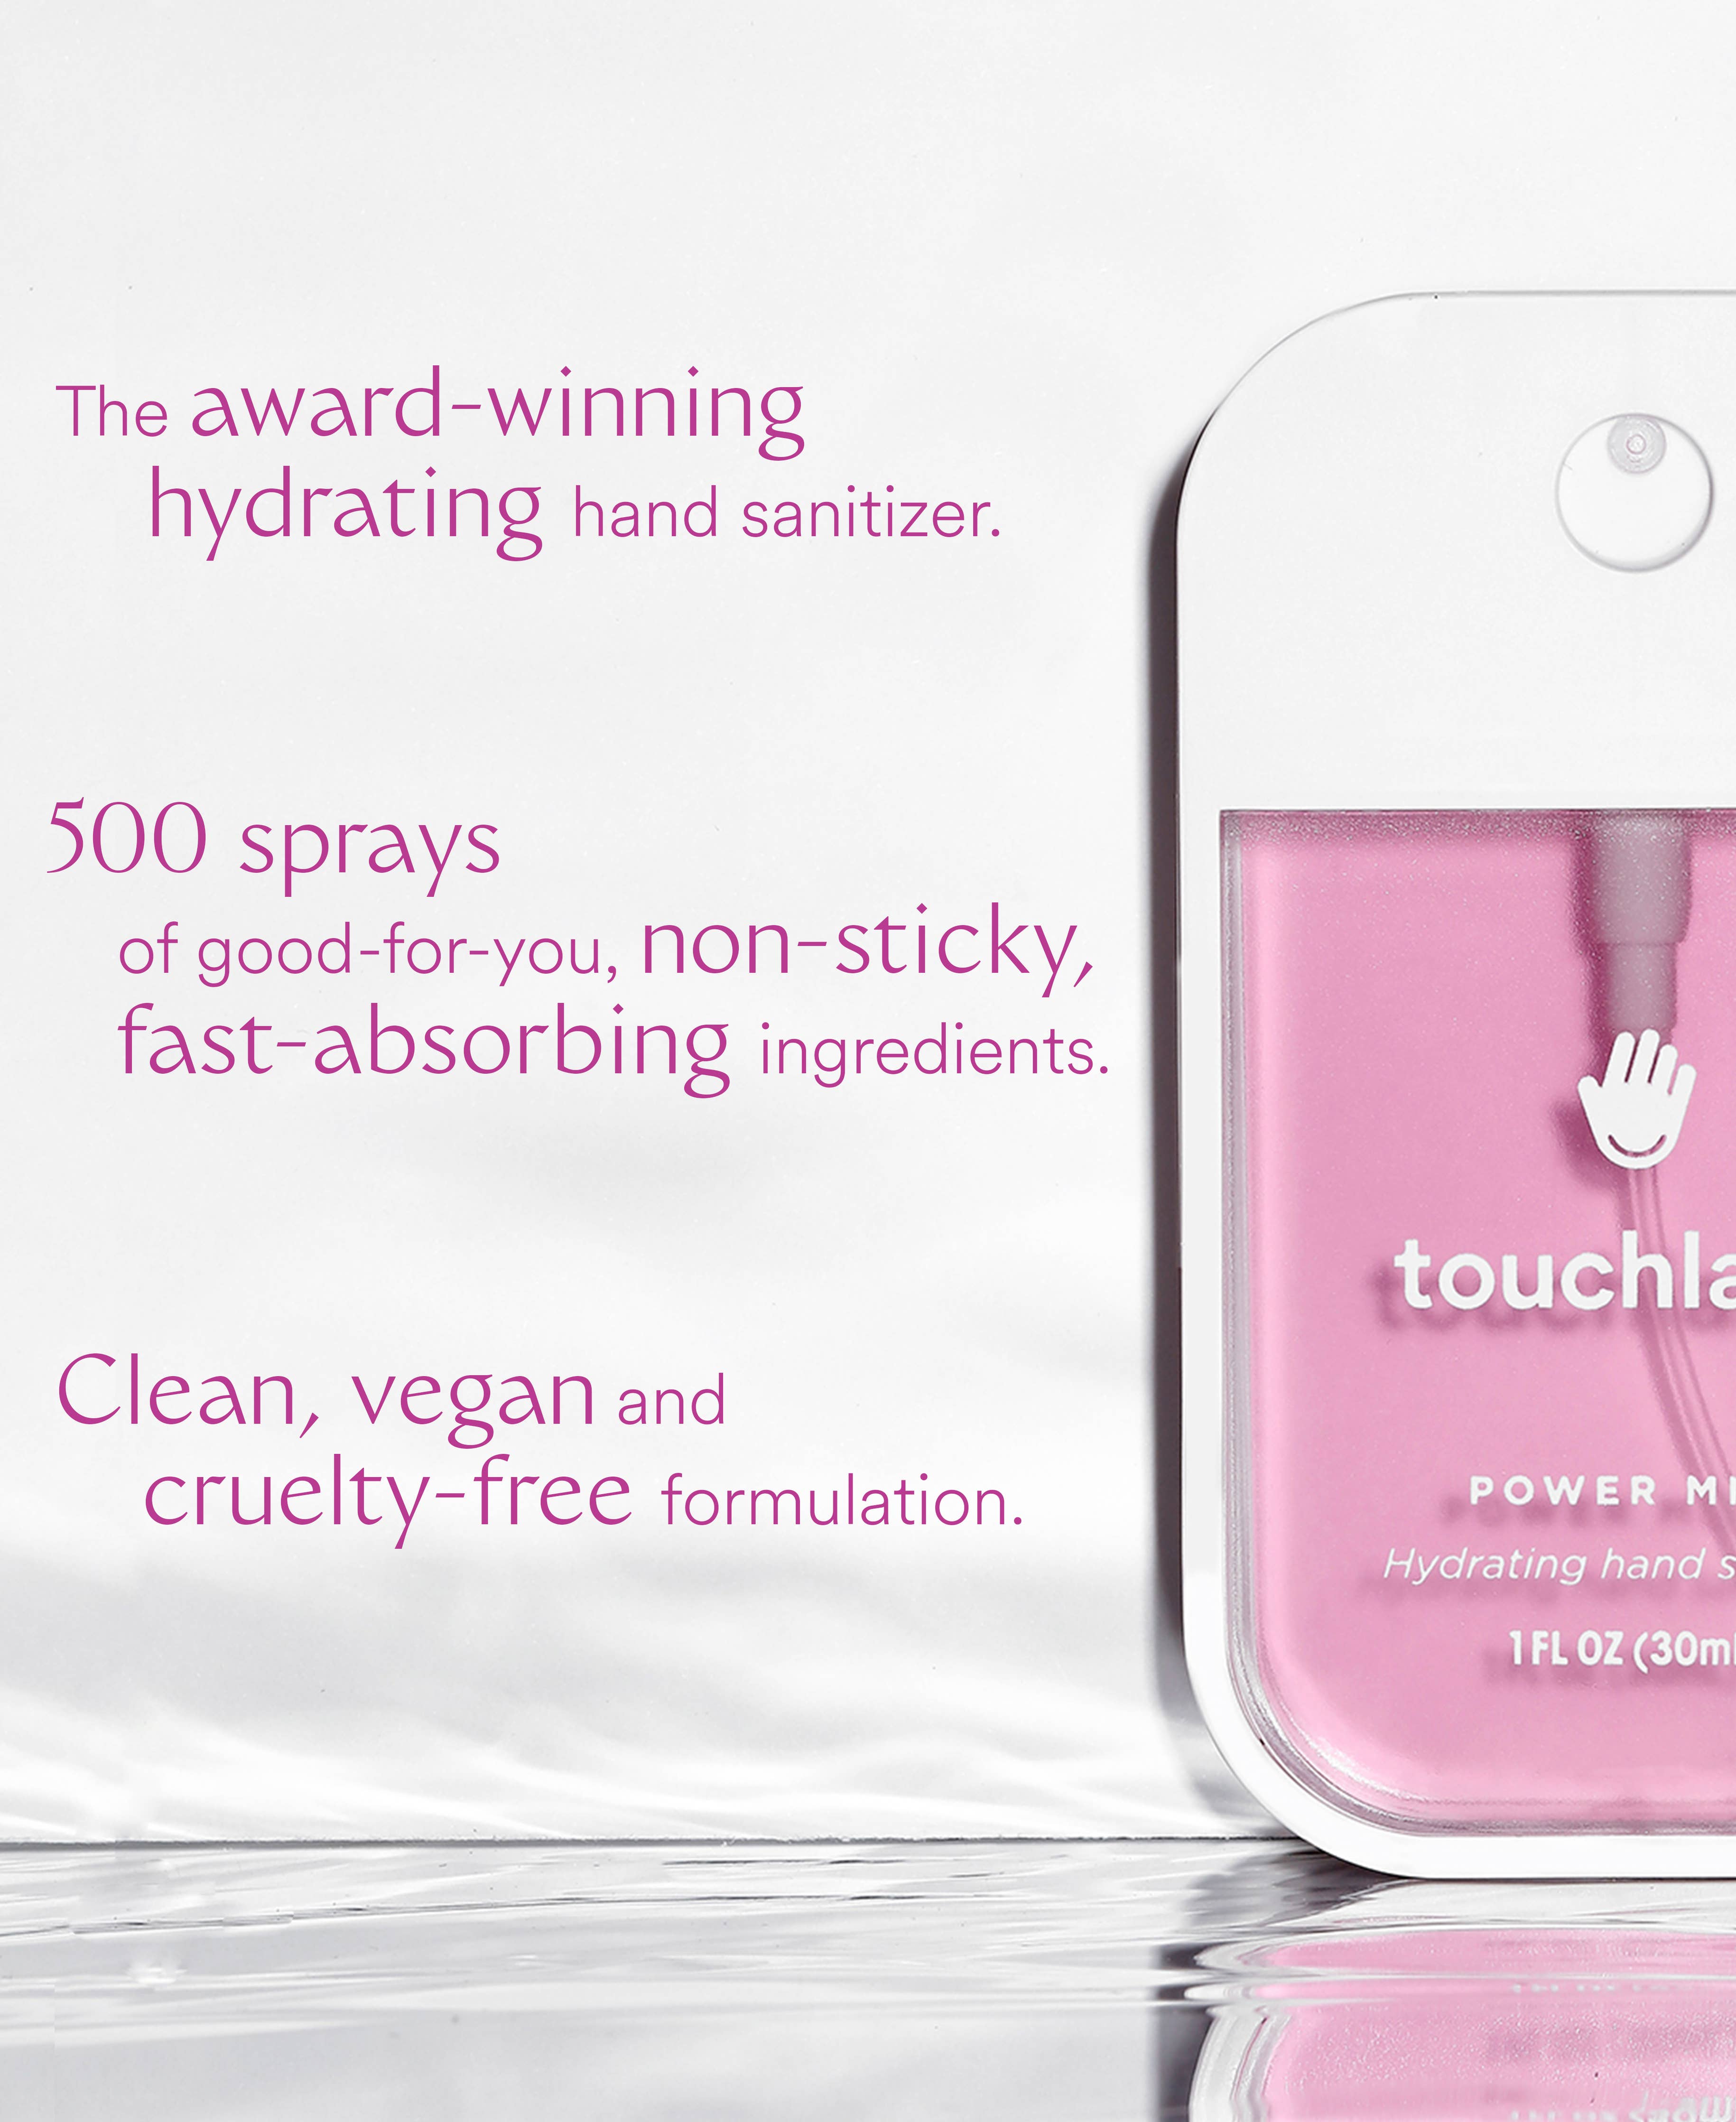 Touchland Power Mist Berry Bliss